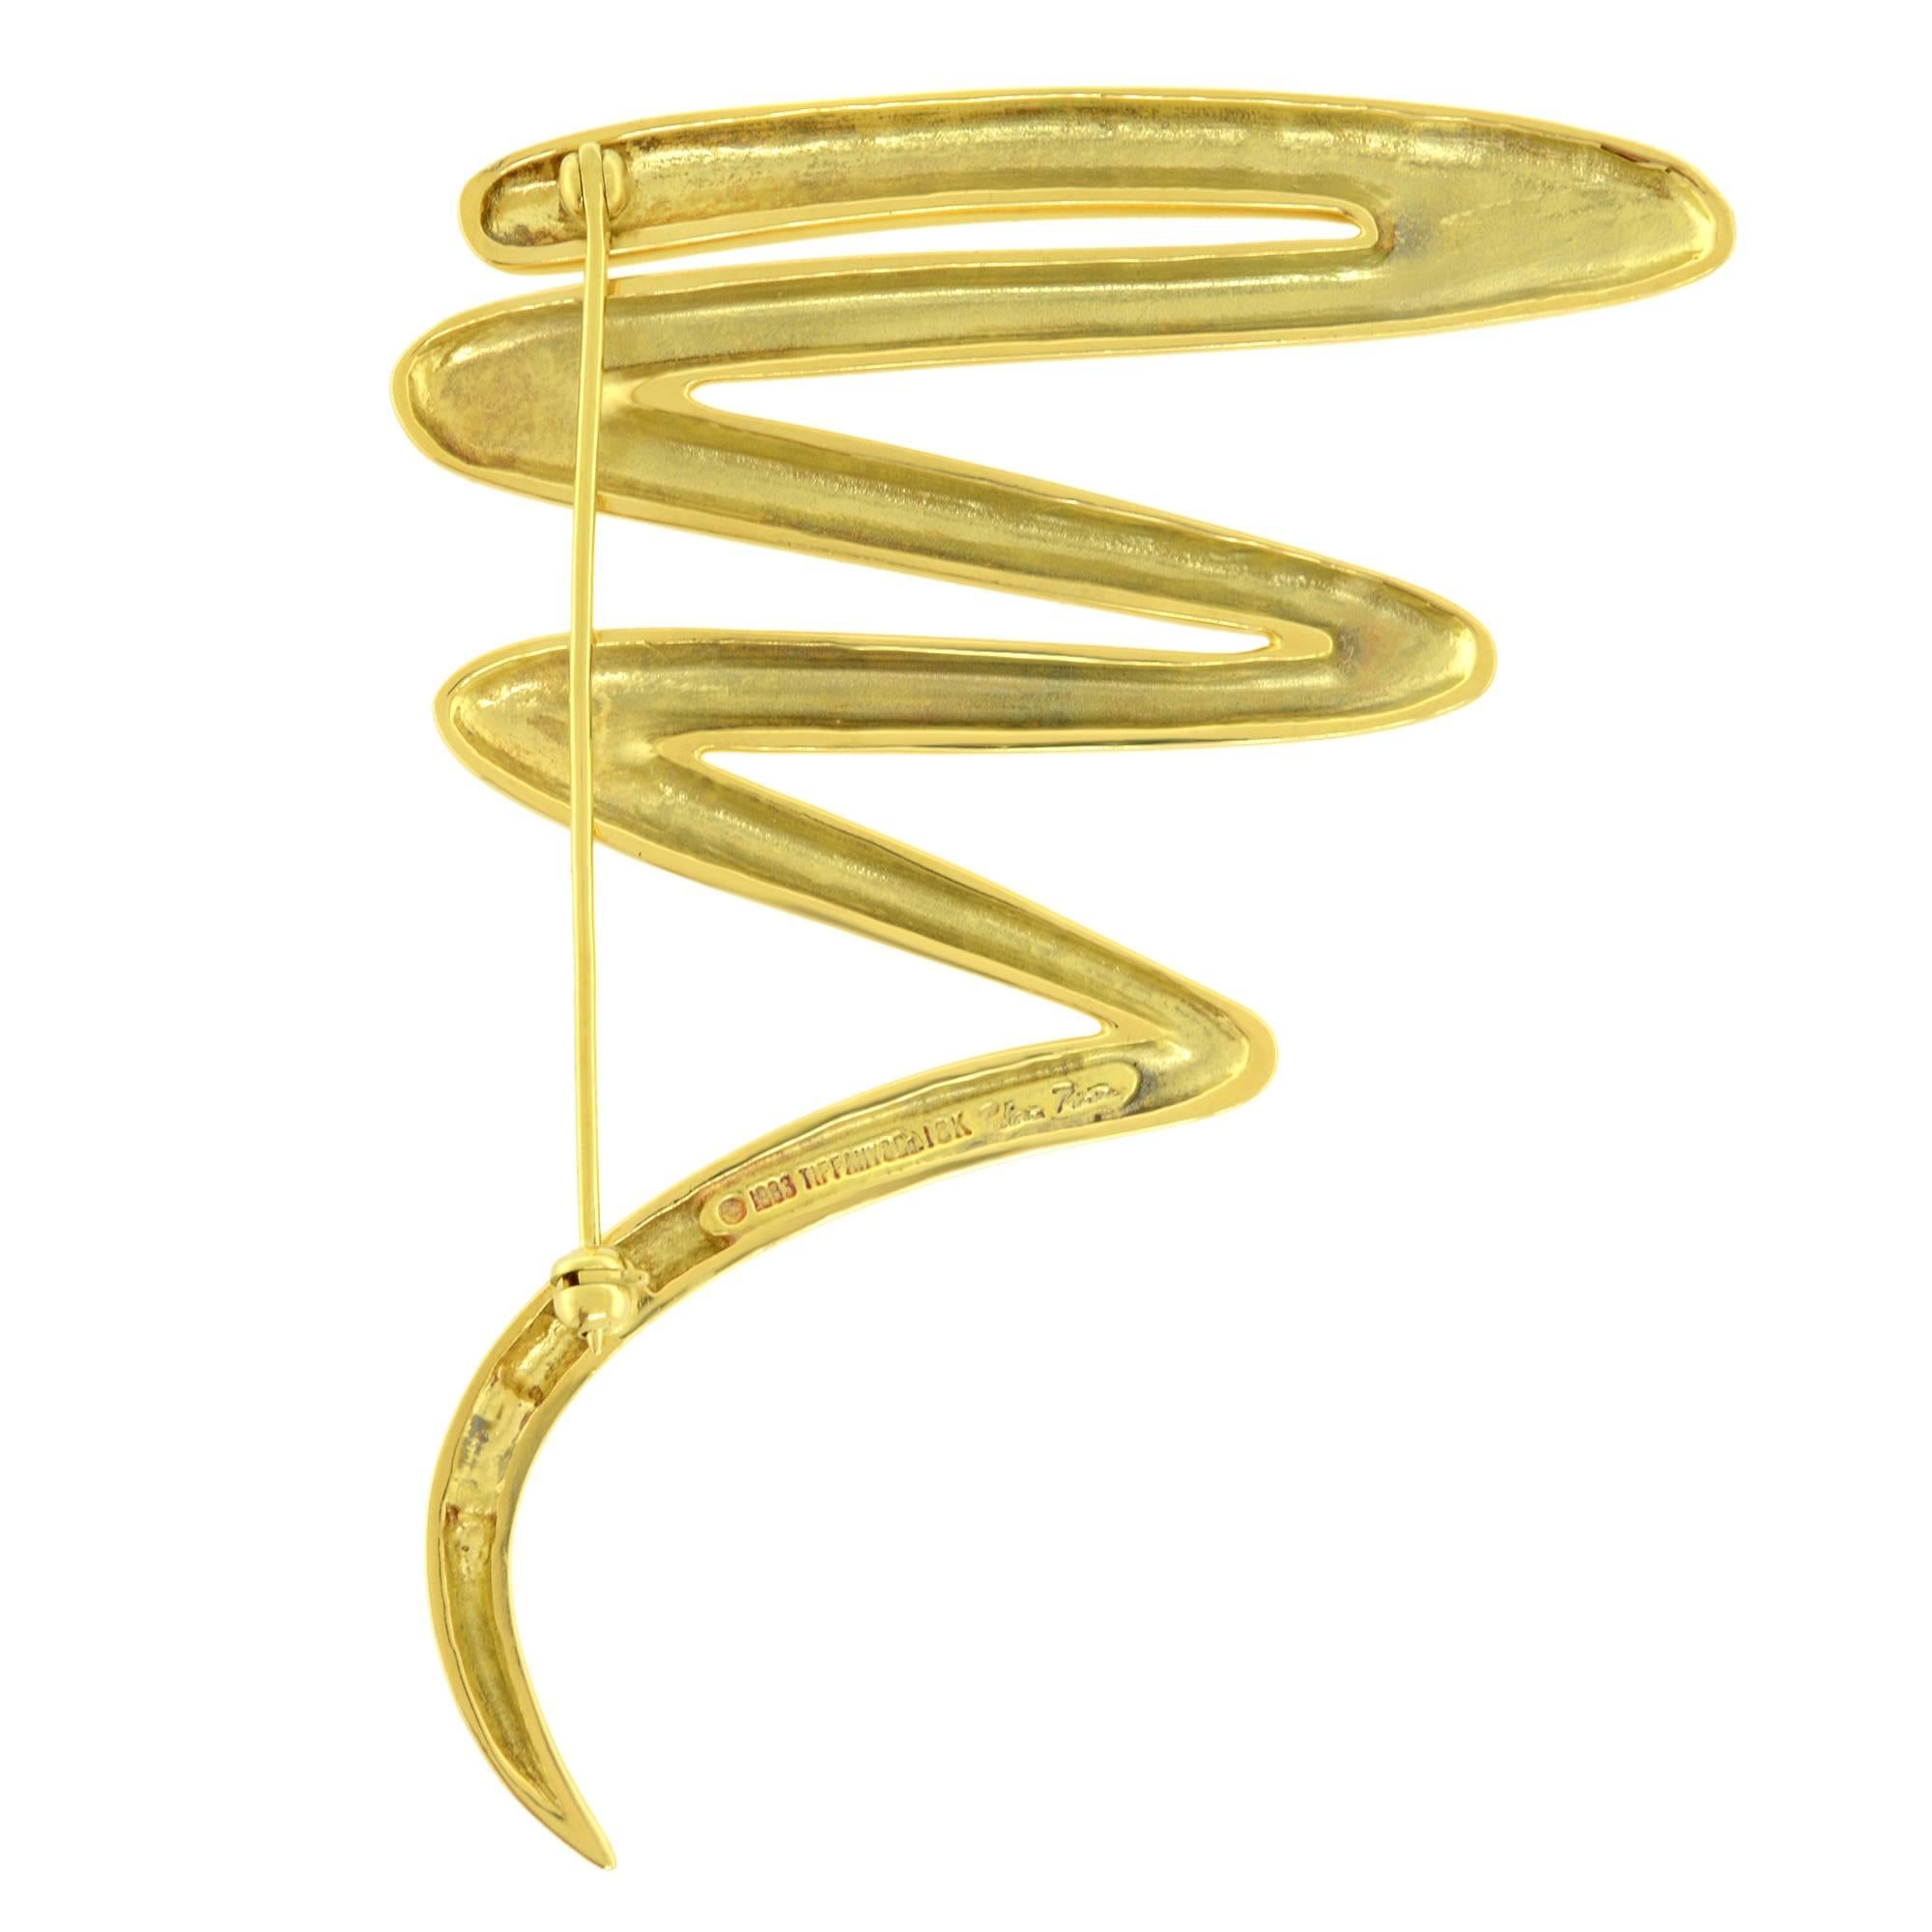 This 100% authentic Paloma Picasso Scribble brooch in 18k gold comes with box, but without papers. Original designs copyrighted by Paloma Picasso. 